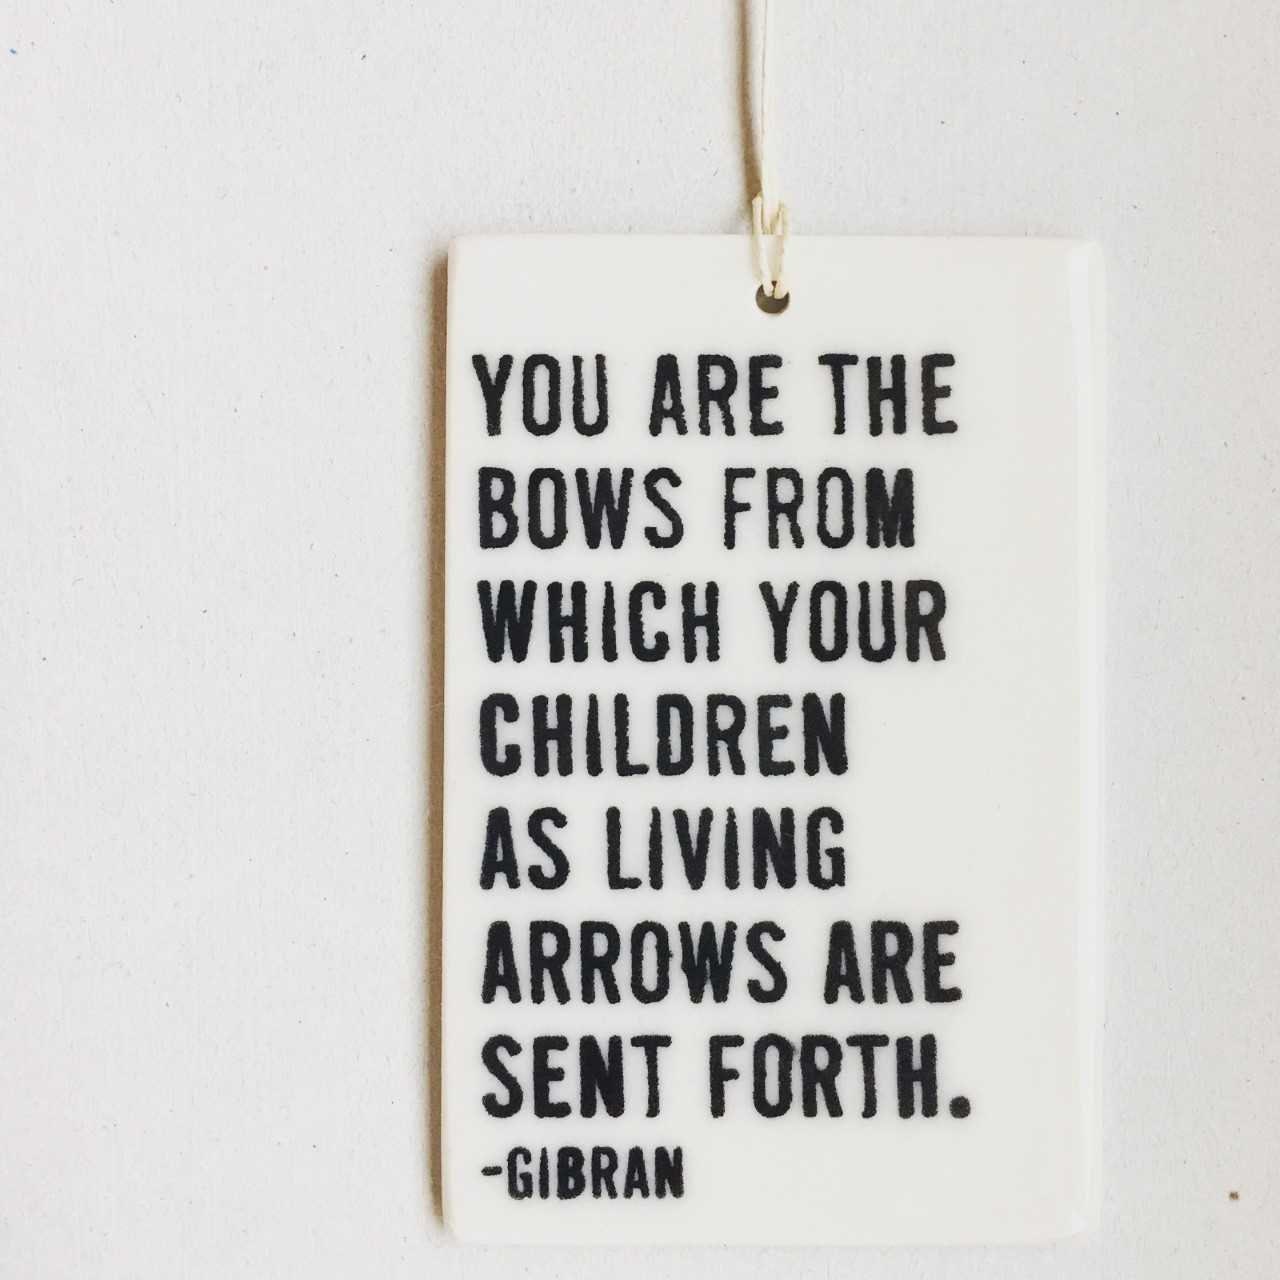 gibran quote | khalil gibran quote wall hanging | kahlil gibran quote | new parents | shower gift | you are the bows | nursery decor